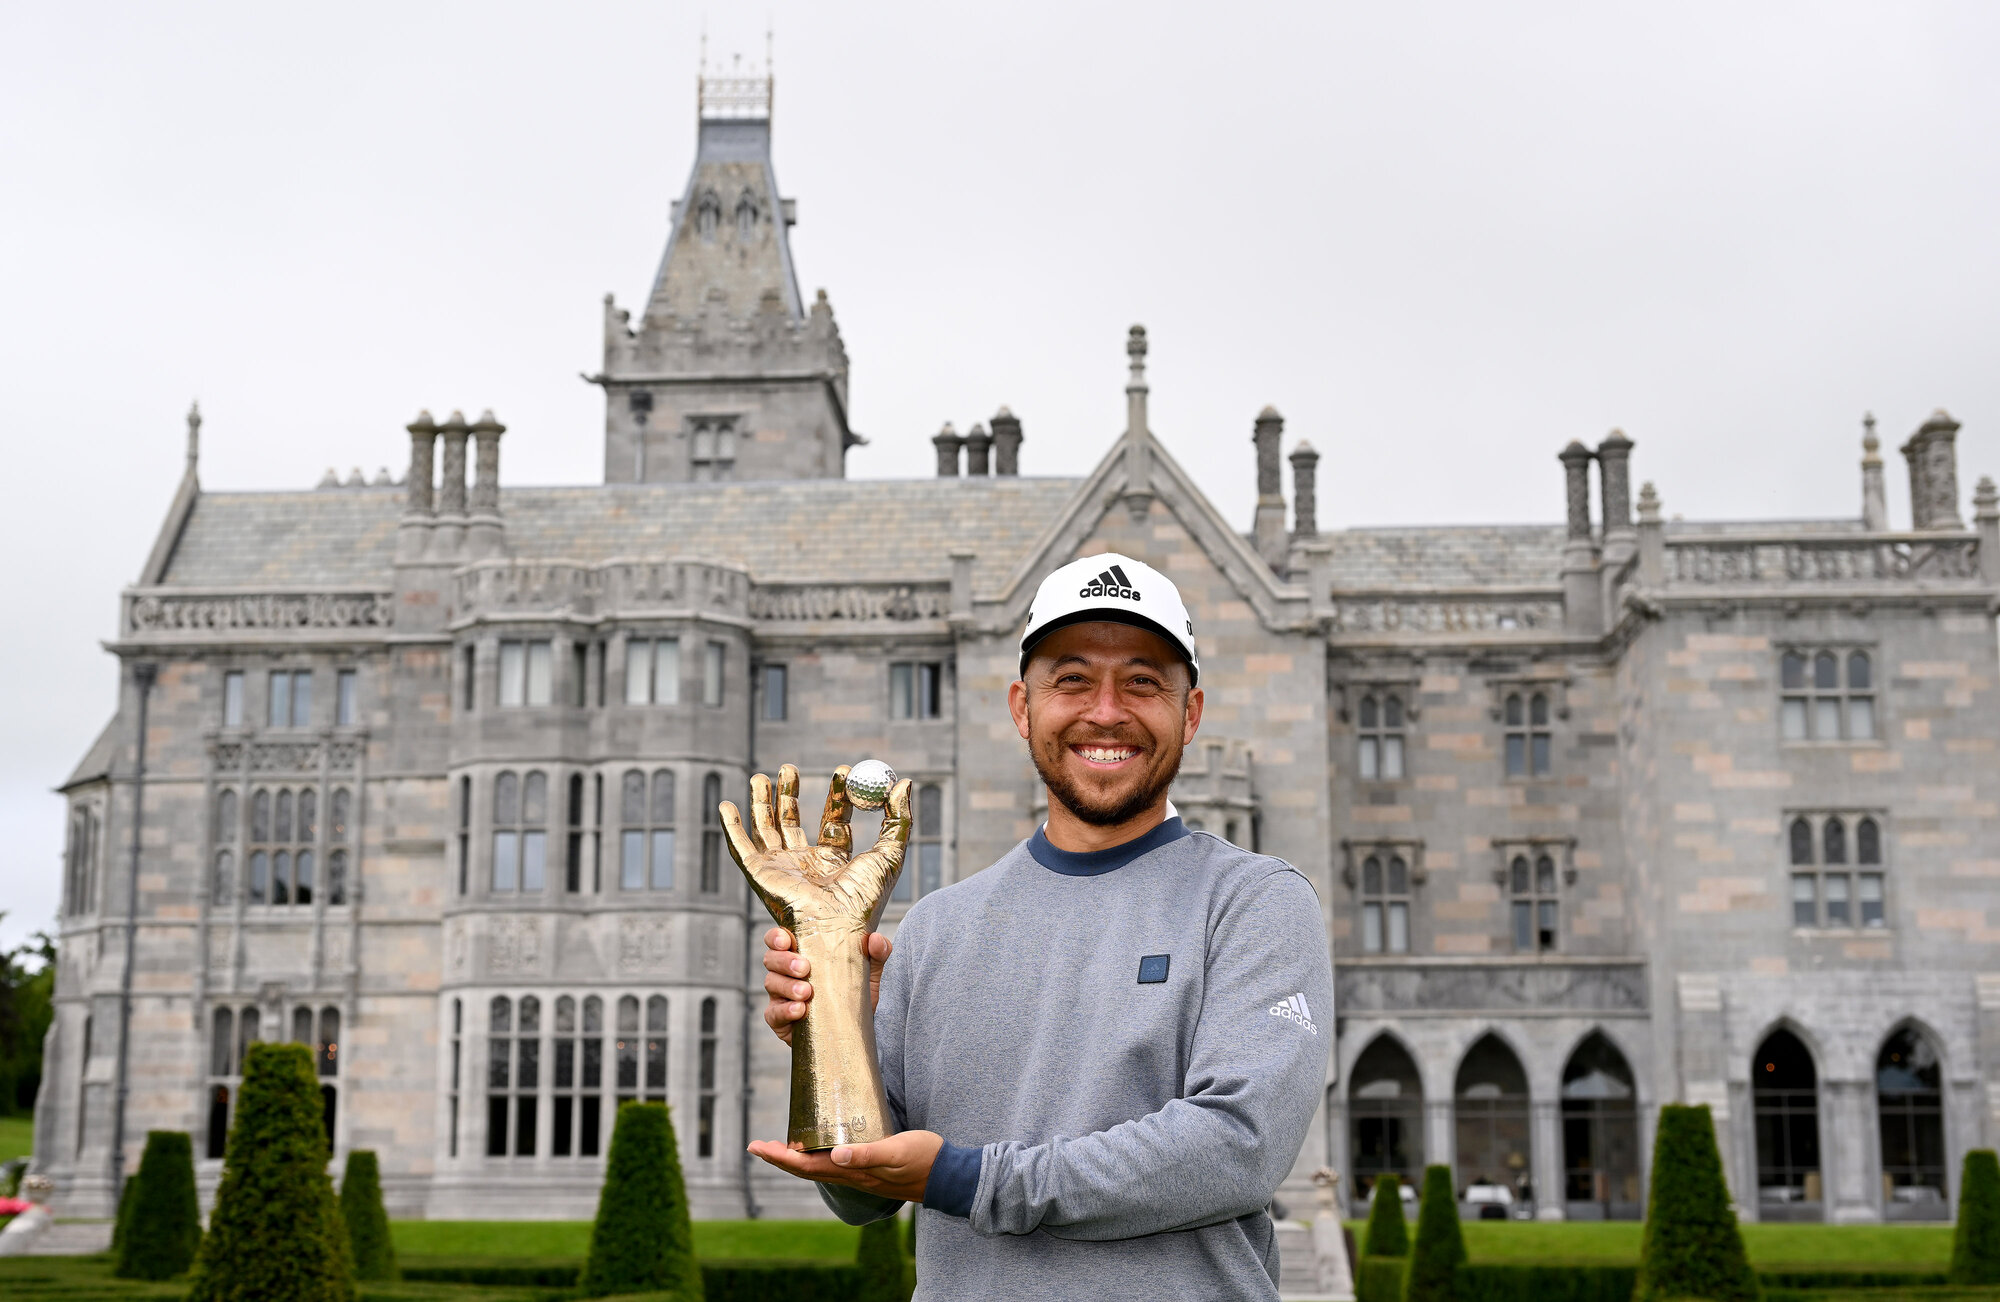 Xander Schauffele pictured at Adare Manor, Co. Limerick, with the 2022 JP McManus Pro-Am trophy, after winning the professional individual prize with a score of 10-under-par Schauffele shot a two-under-par to seal his win, following a course record 64 yesterday